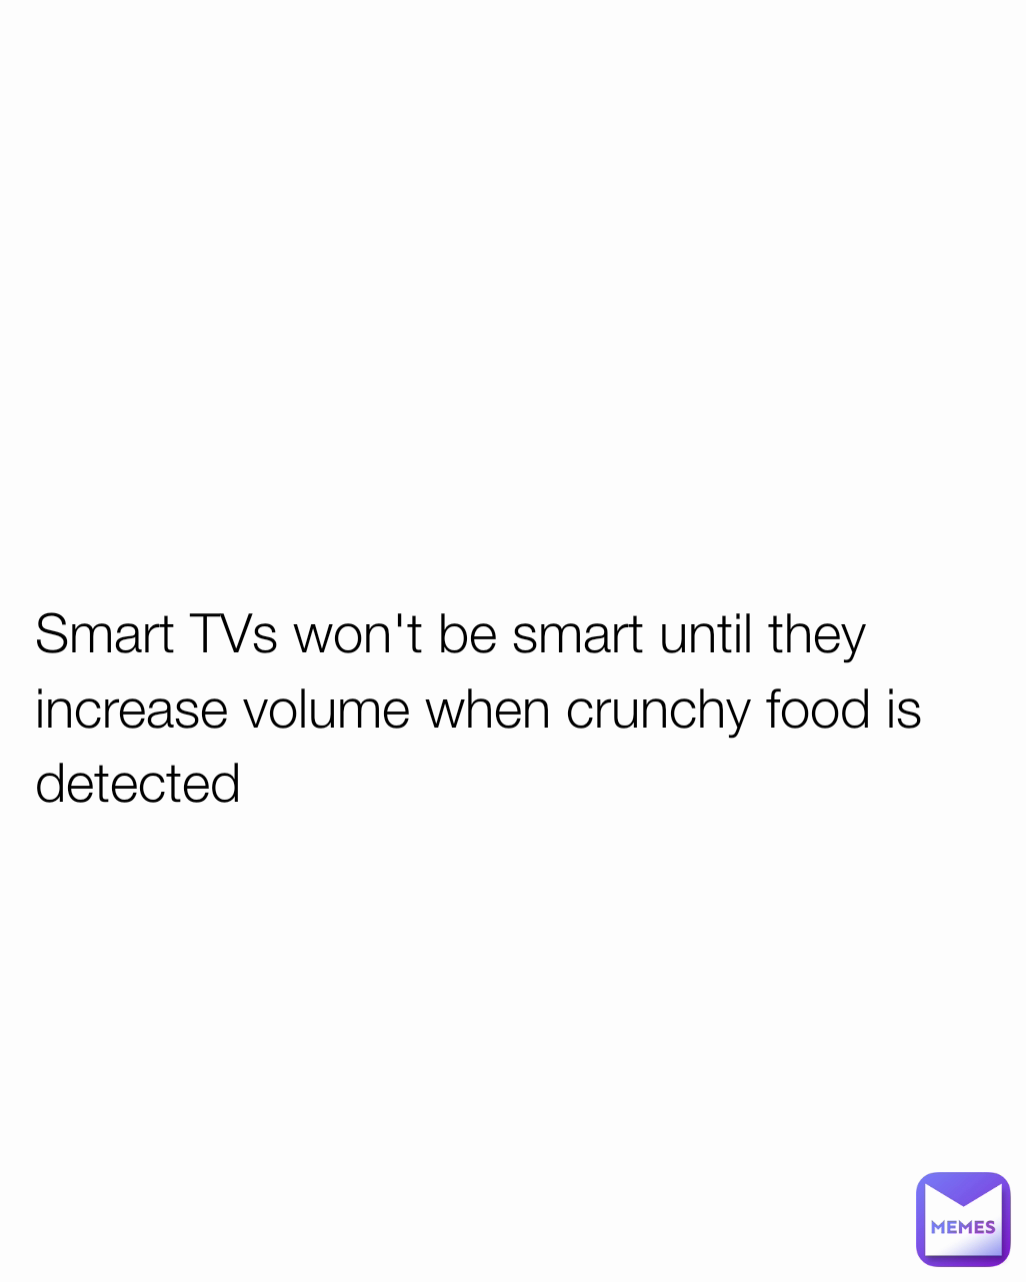 Smart TVs won't be smart until they increase volume when crunchy food is detected